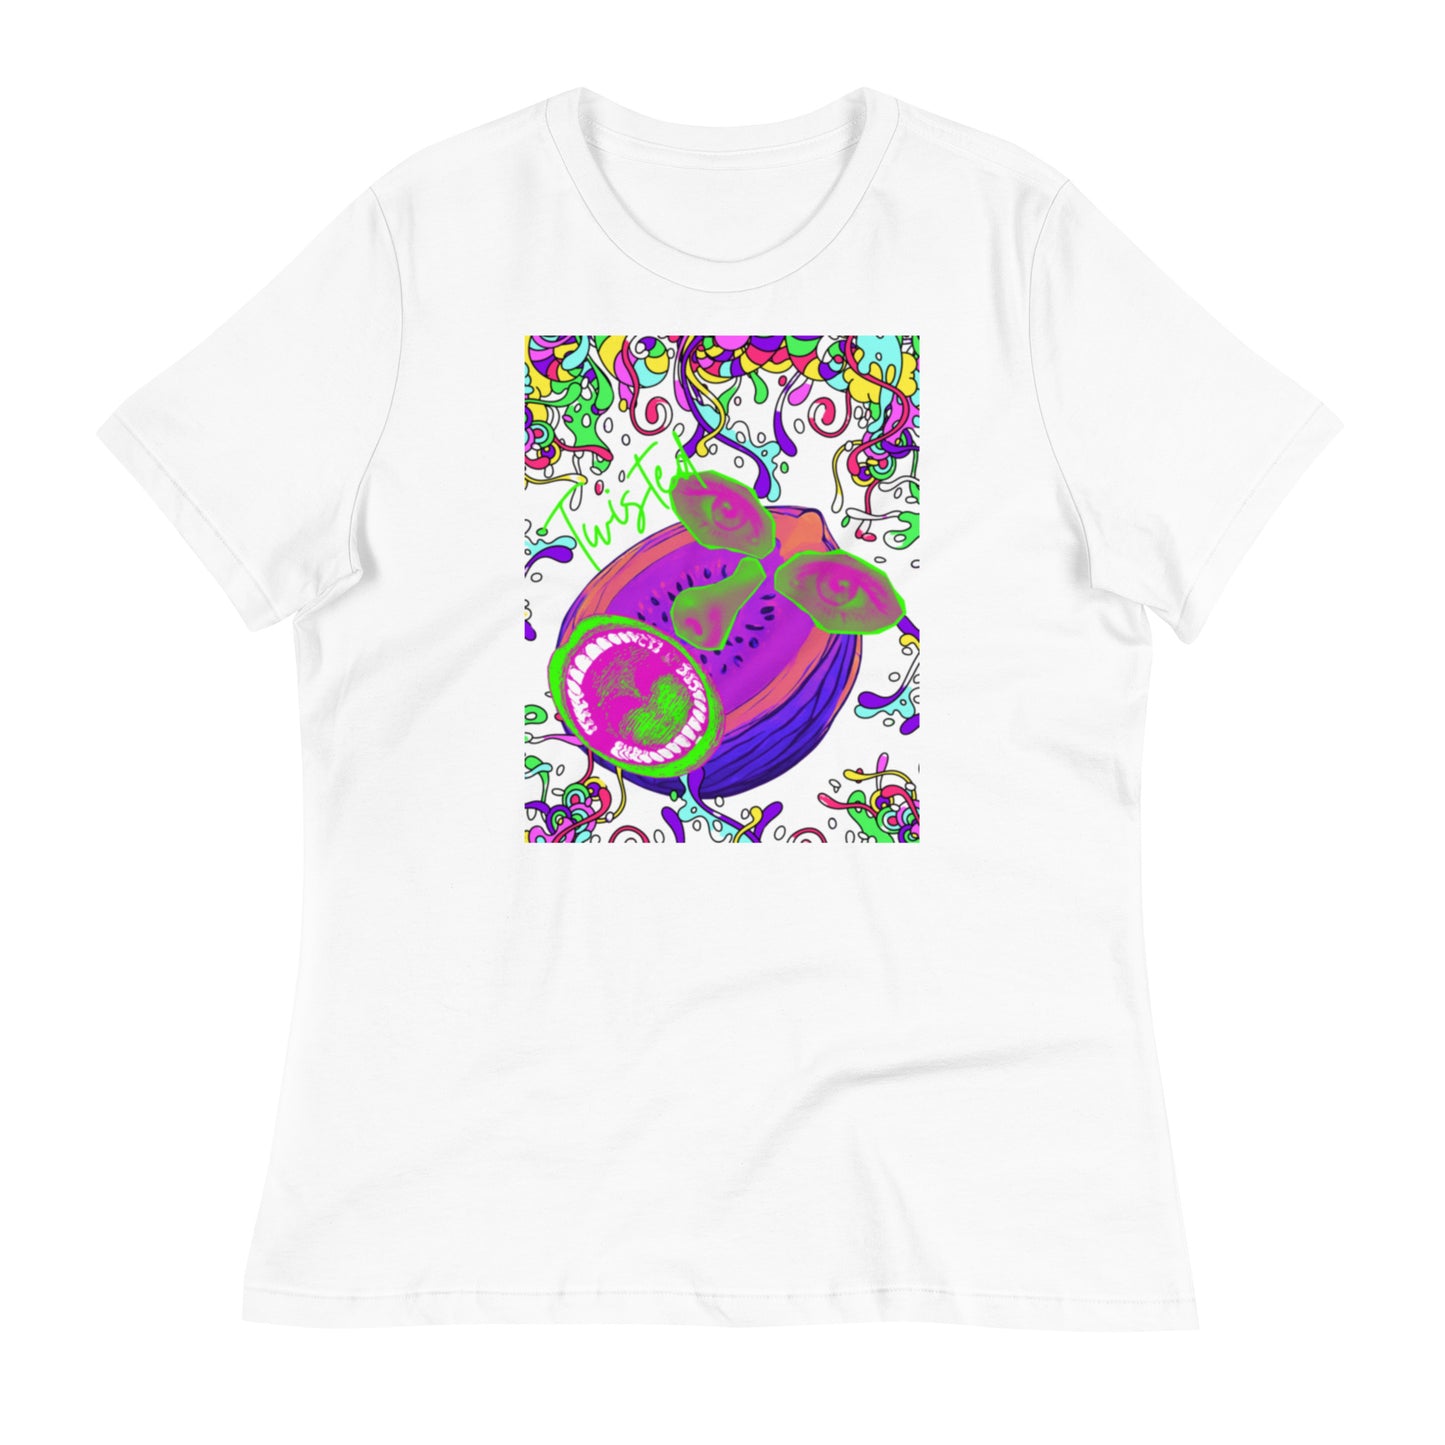 A Twisted Melon Women's Tee